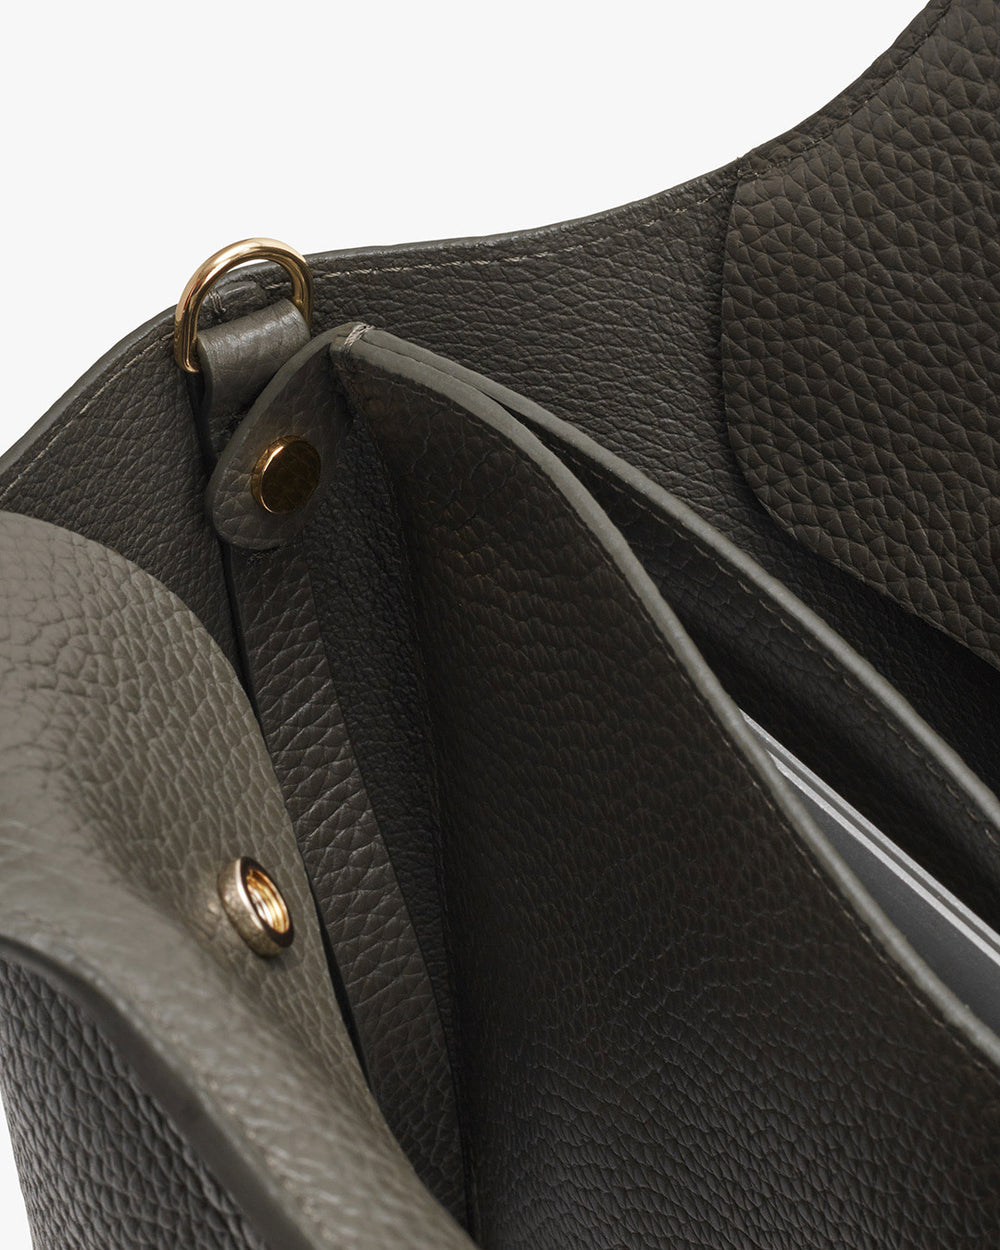 Close-up view of a handbag showing the clasp and stitching detail.